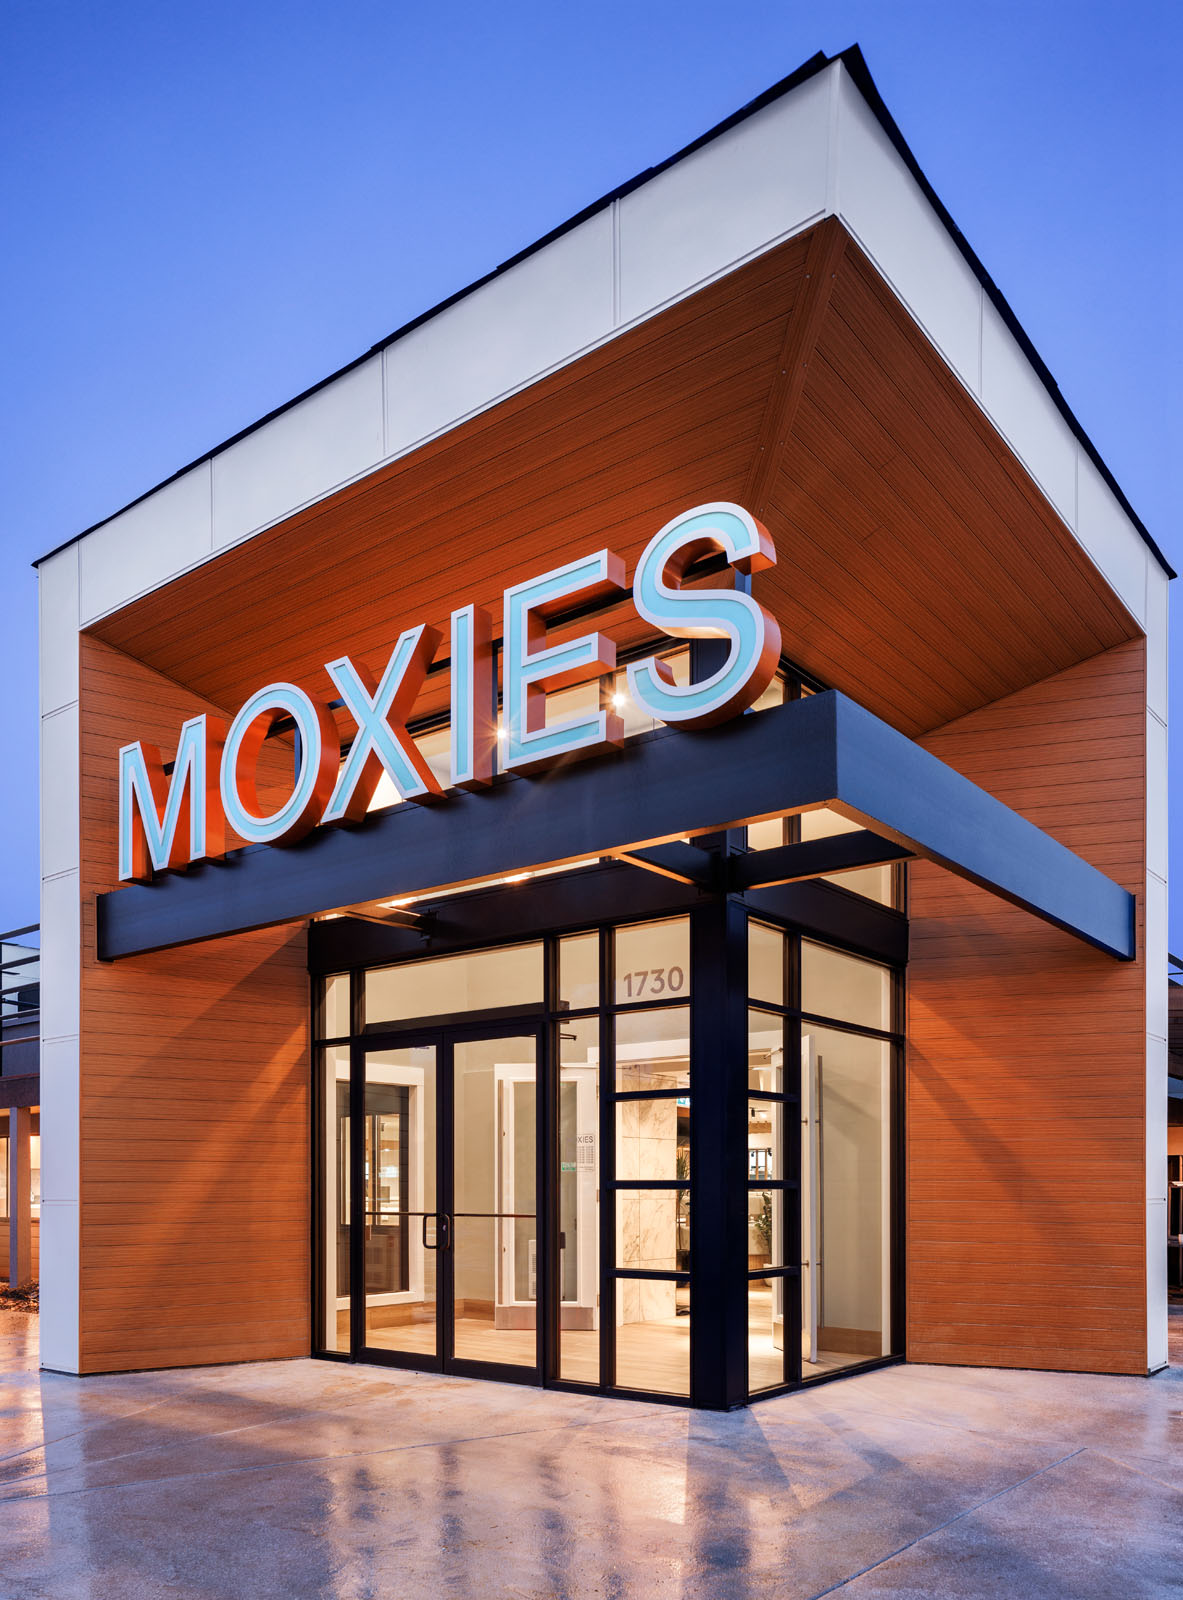 Architectural Exterior of New Moxies Restaurant Photographed at Dusk. Front Entrance With Light Spilling Out Past Moxies Sign.